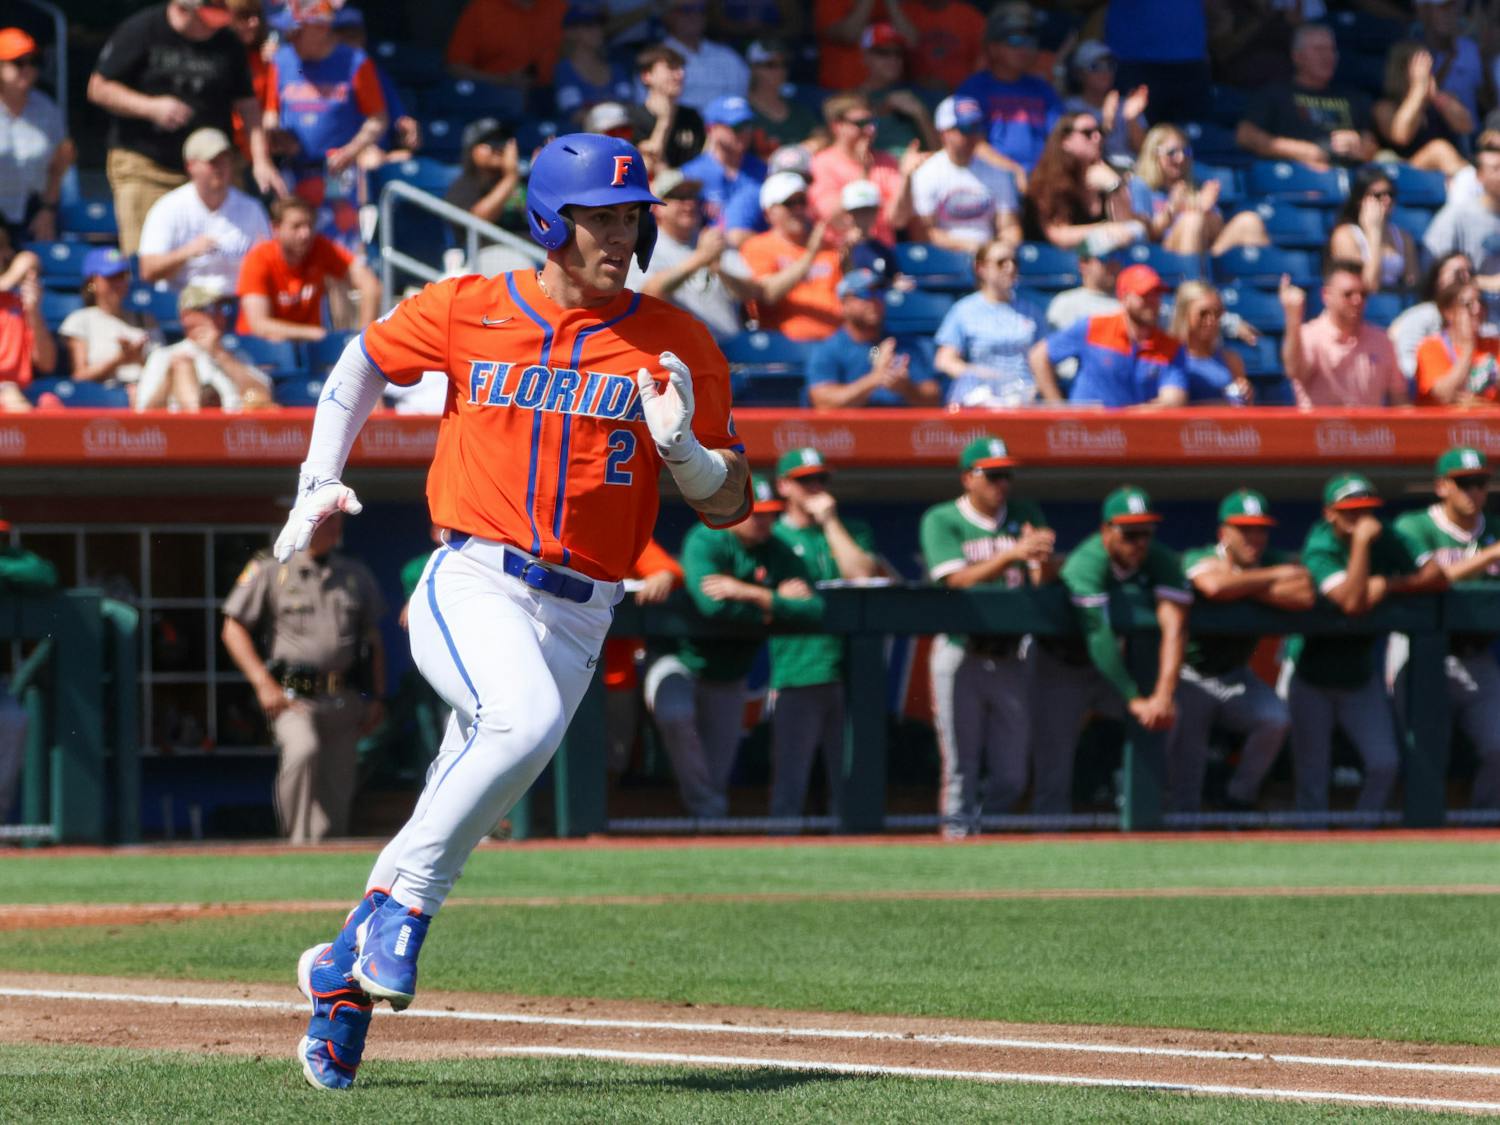 Florida right fielder Ty Evans runs toward first base in the Gators' 14-4 win against the Miami Hurricanes Sunday, March 5, 2023.